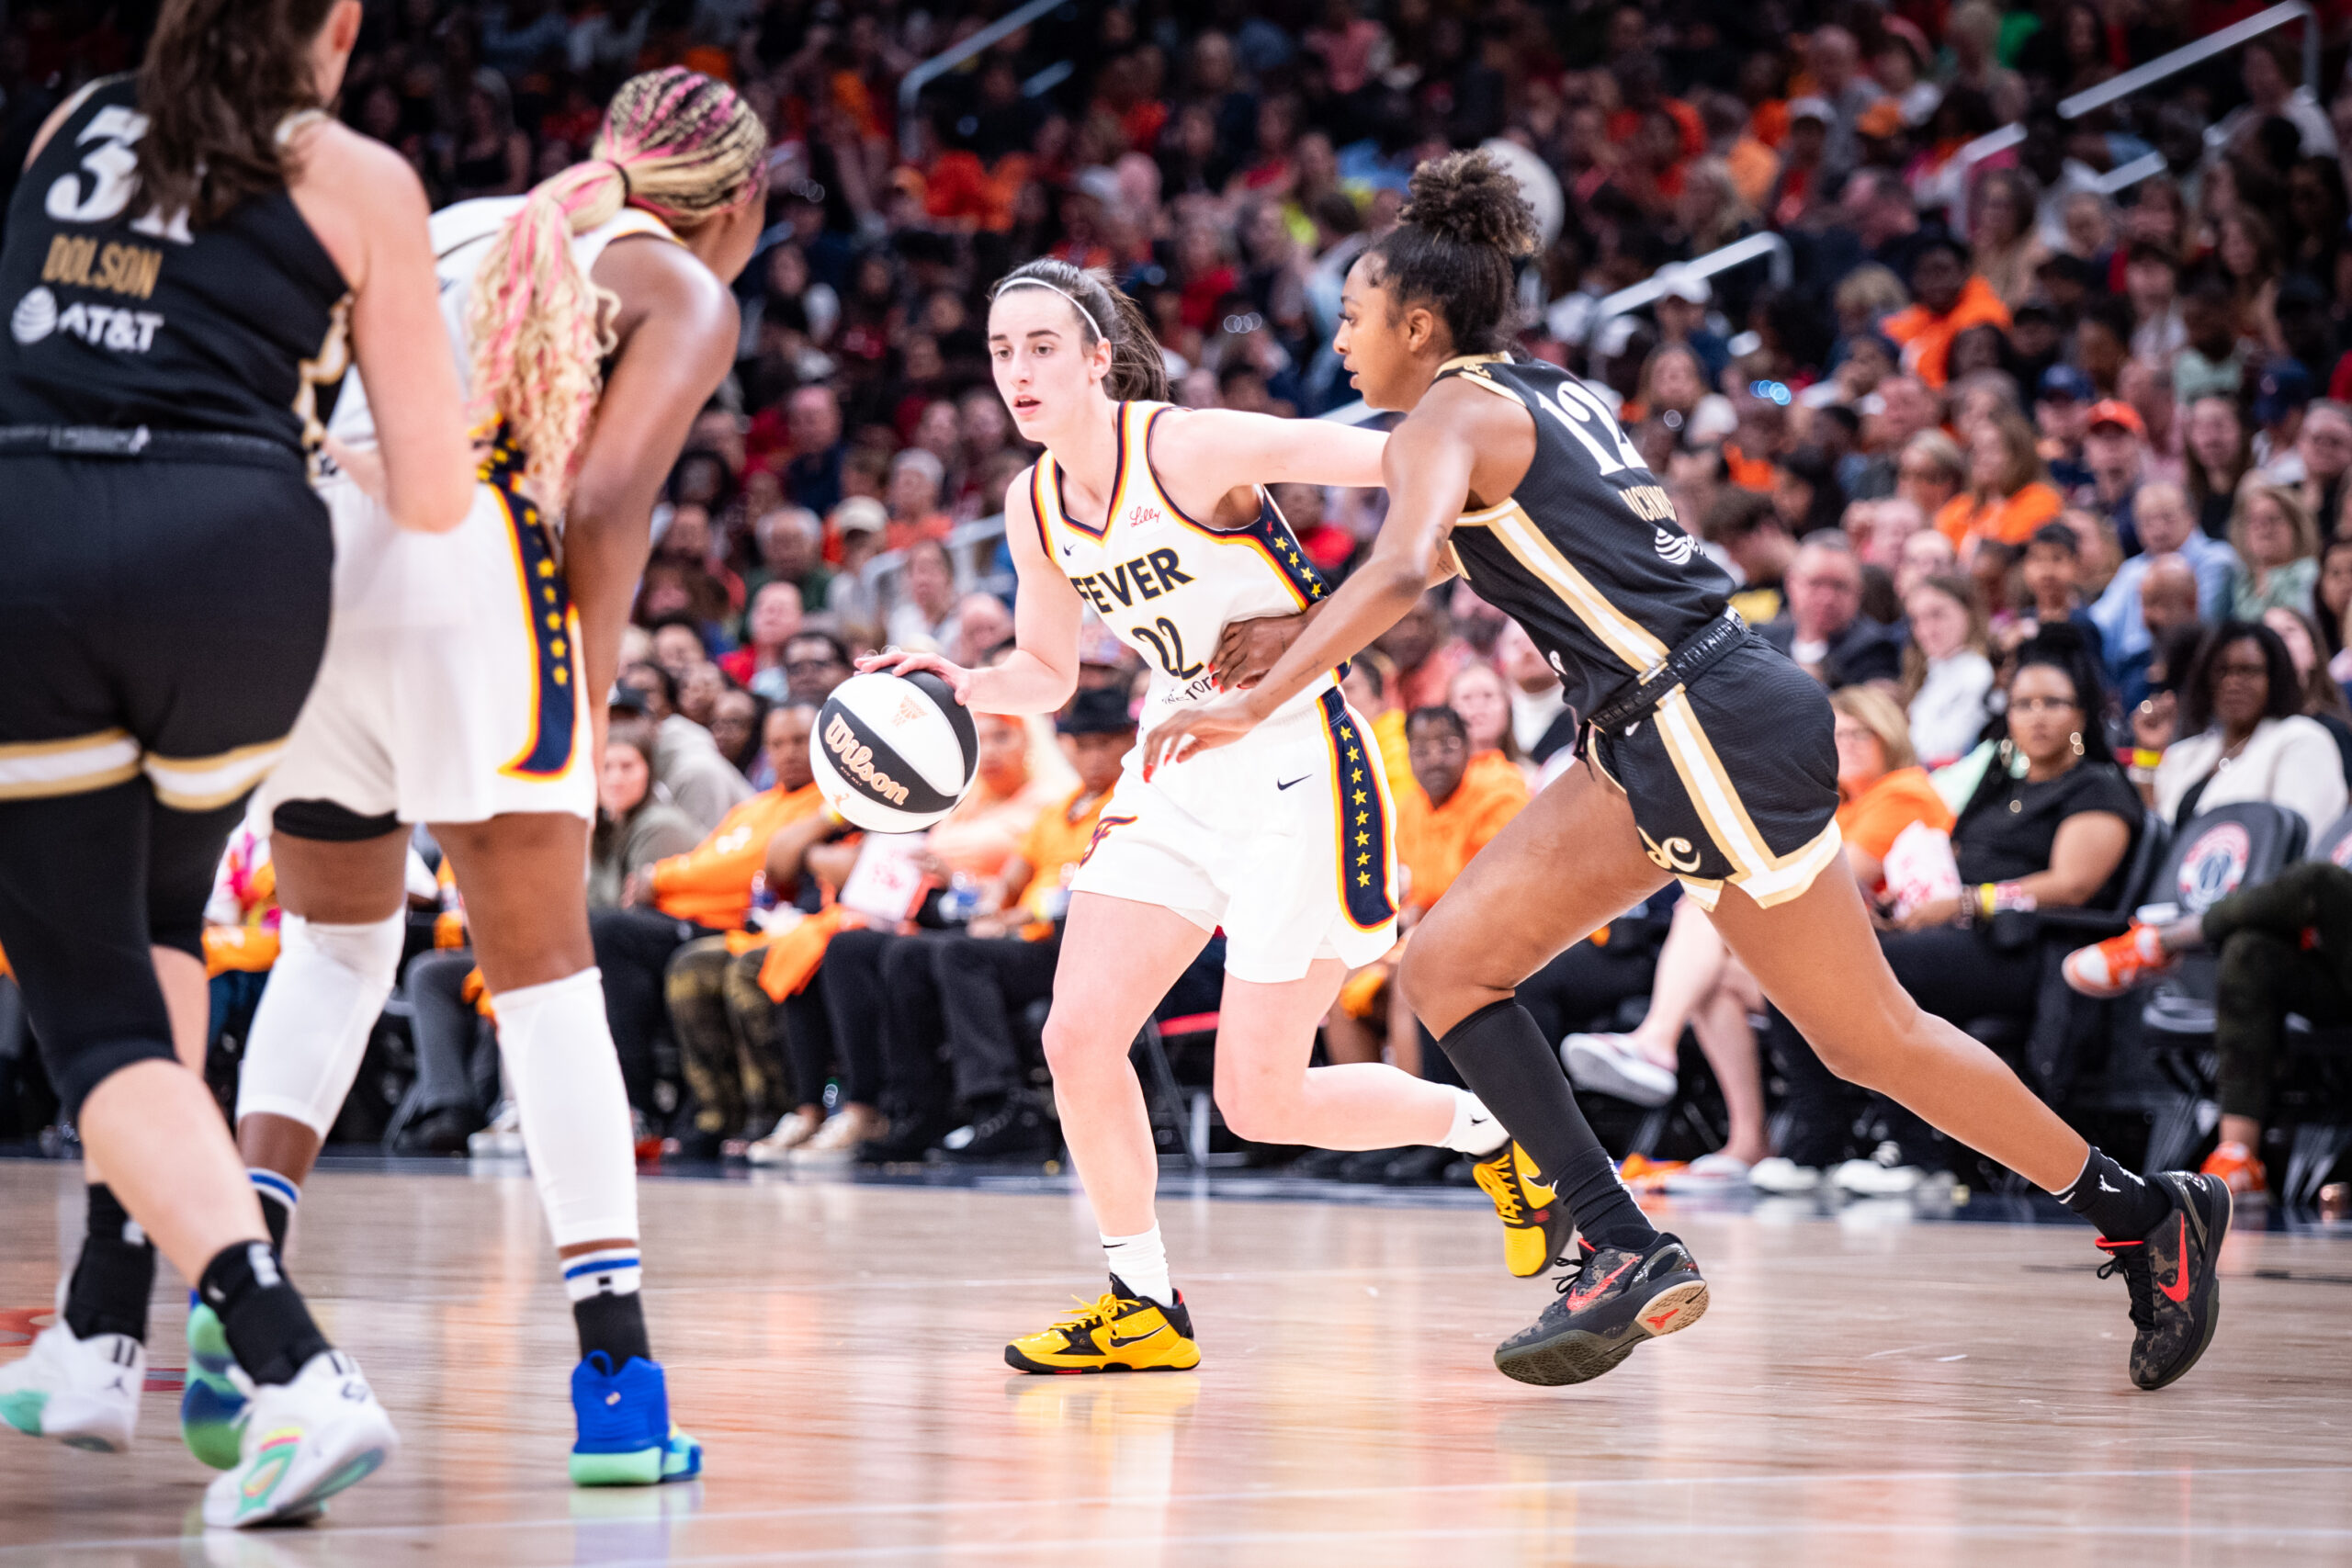 Three All-Star nods point to strong foundation for Indiana Fever – The Next